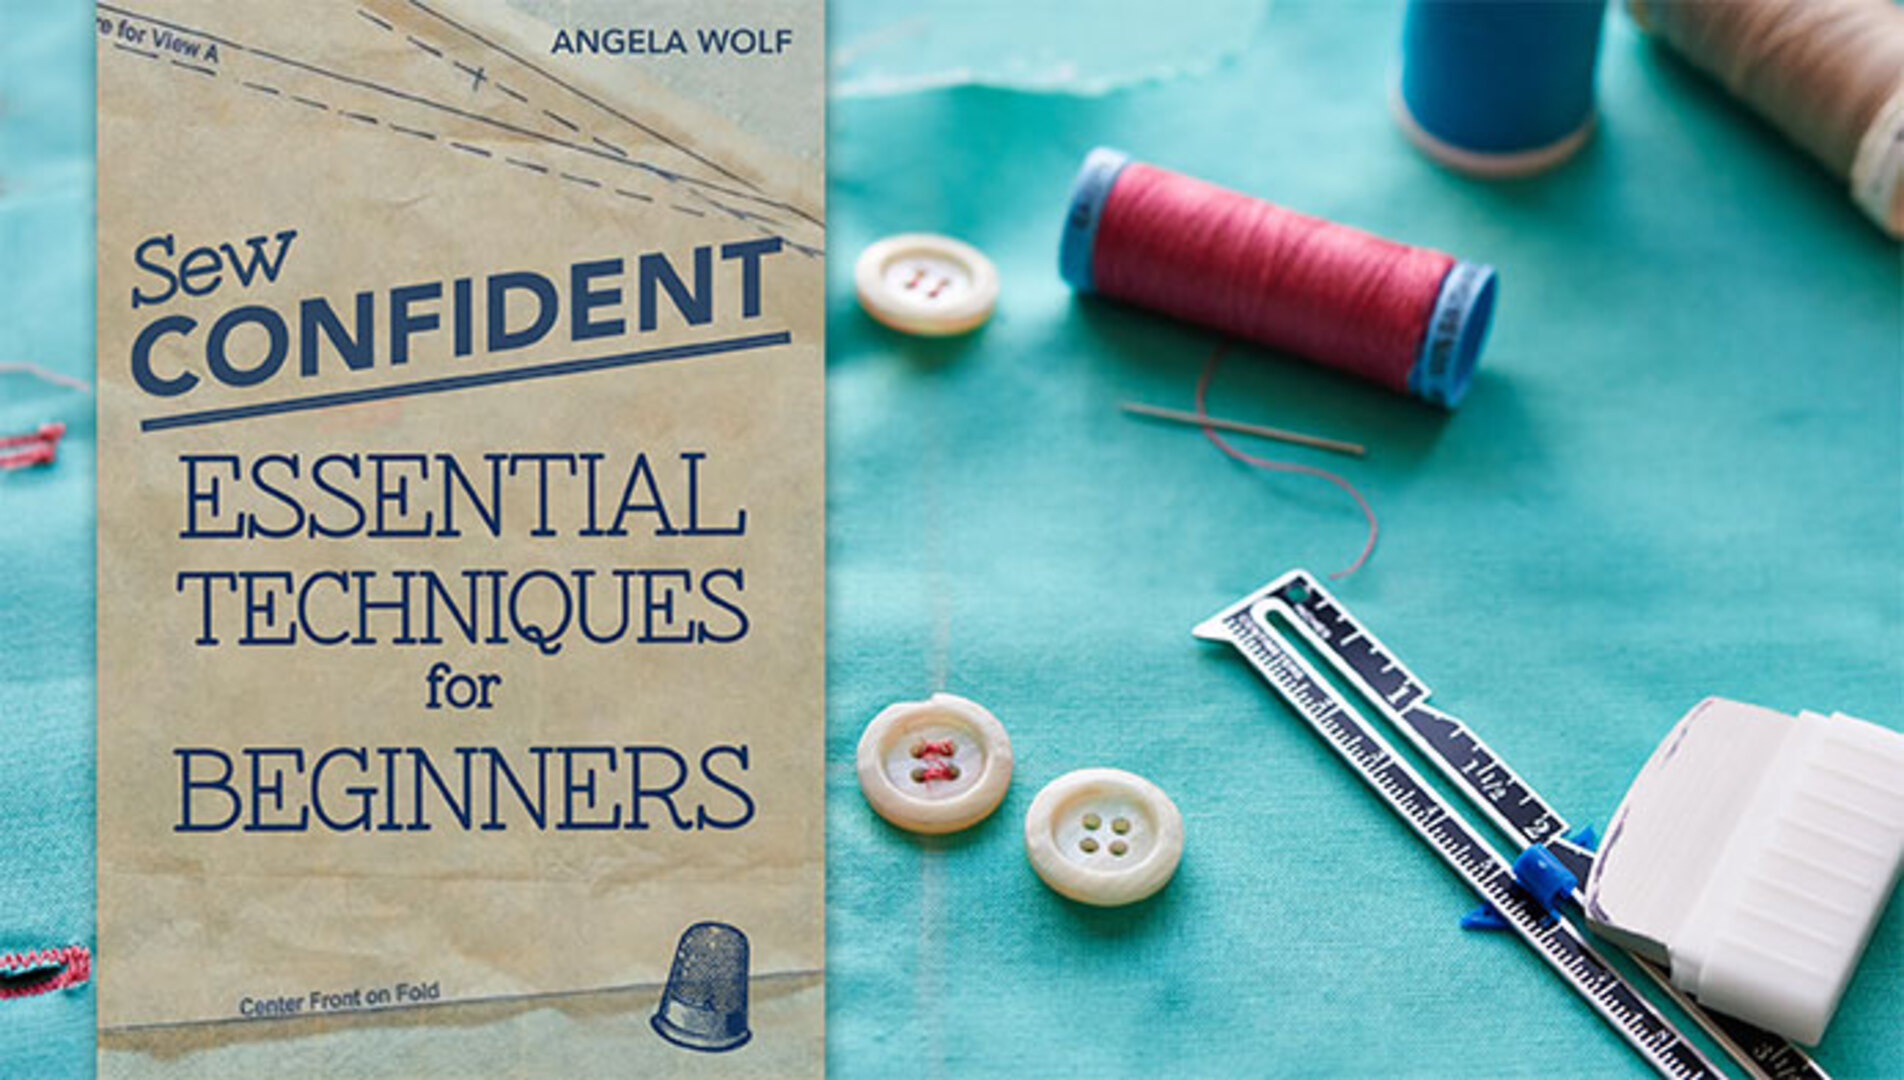 The Beginner's Guide to Sewing So You Can Stitch with Confidence